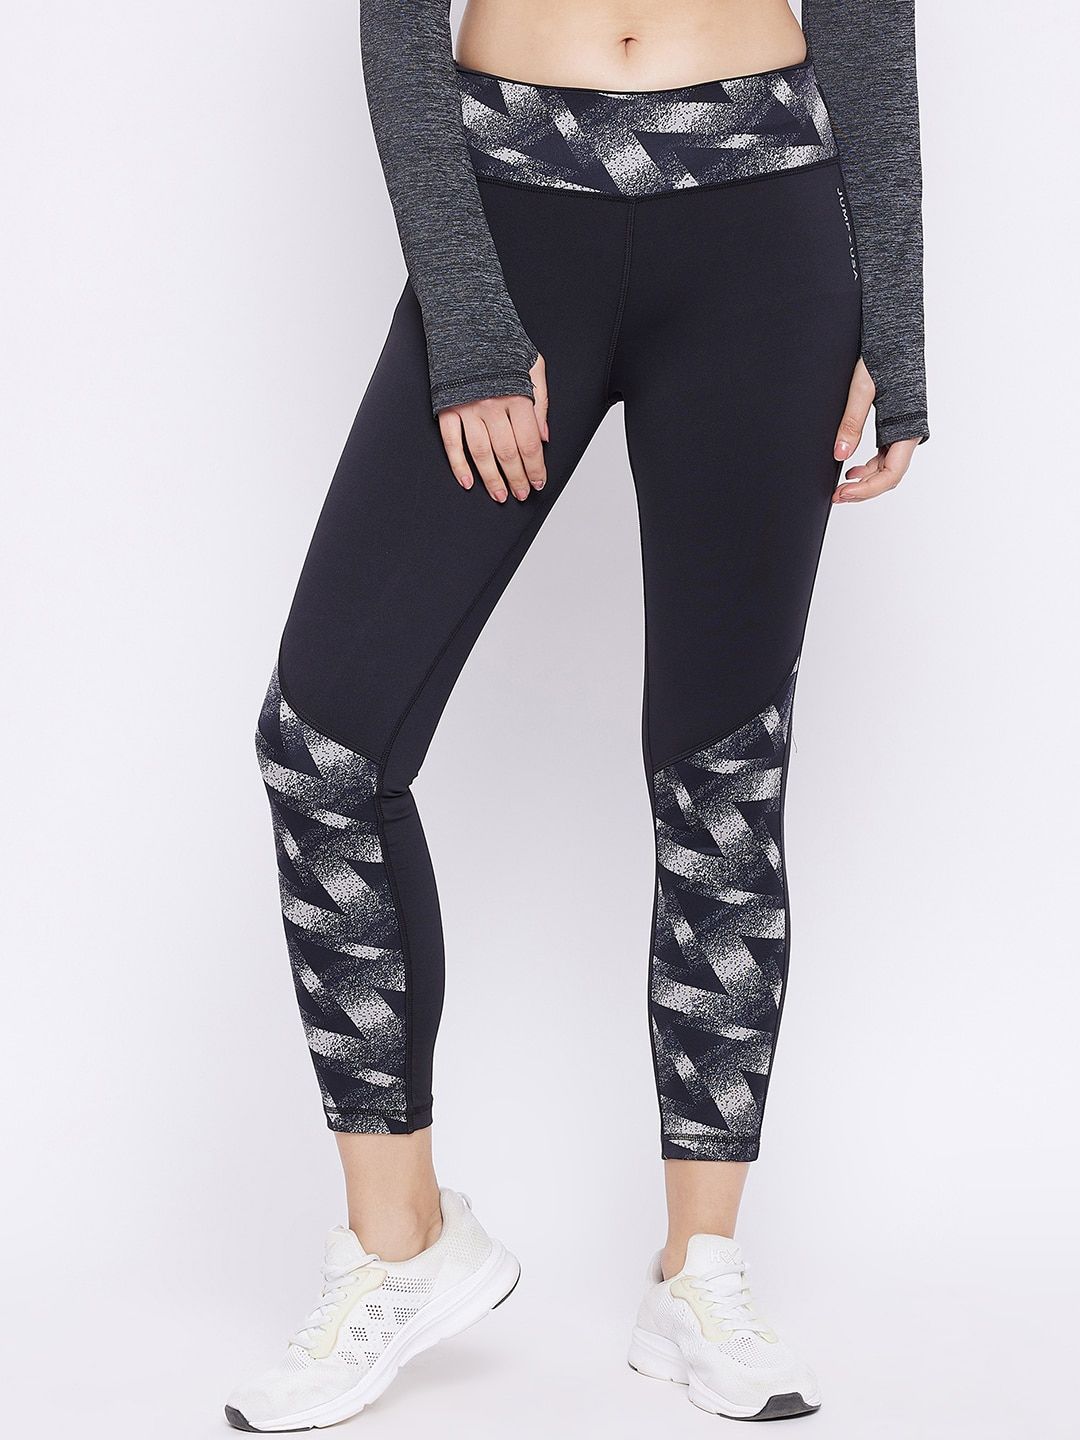 JUMP USA Women Black & White Printed Tights Price in India